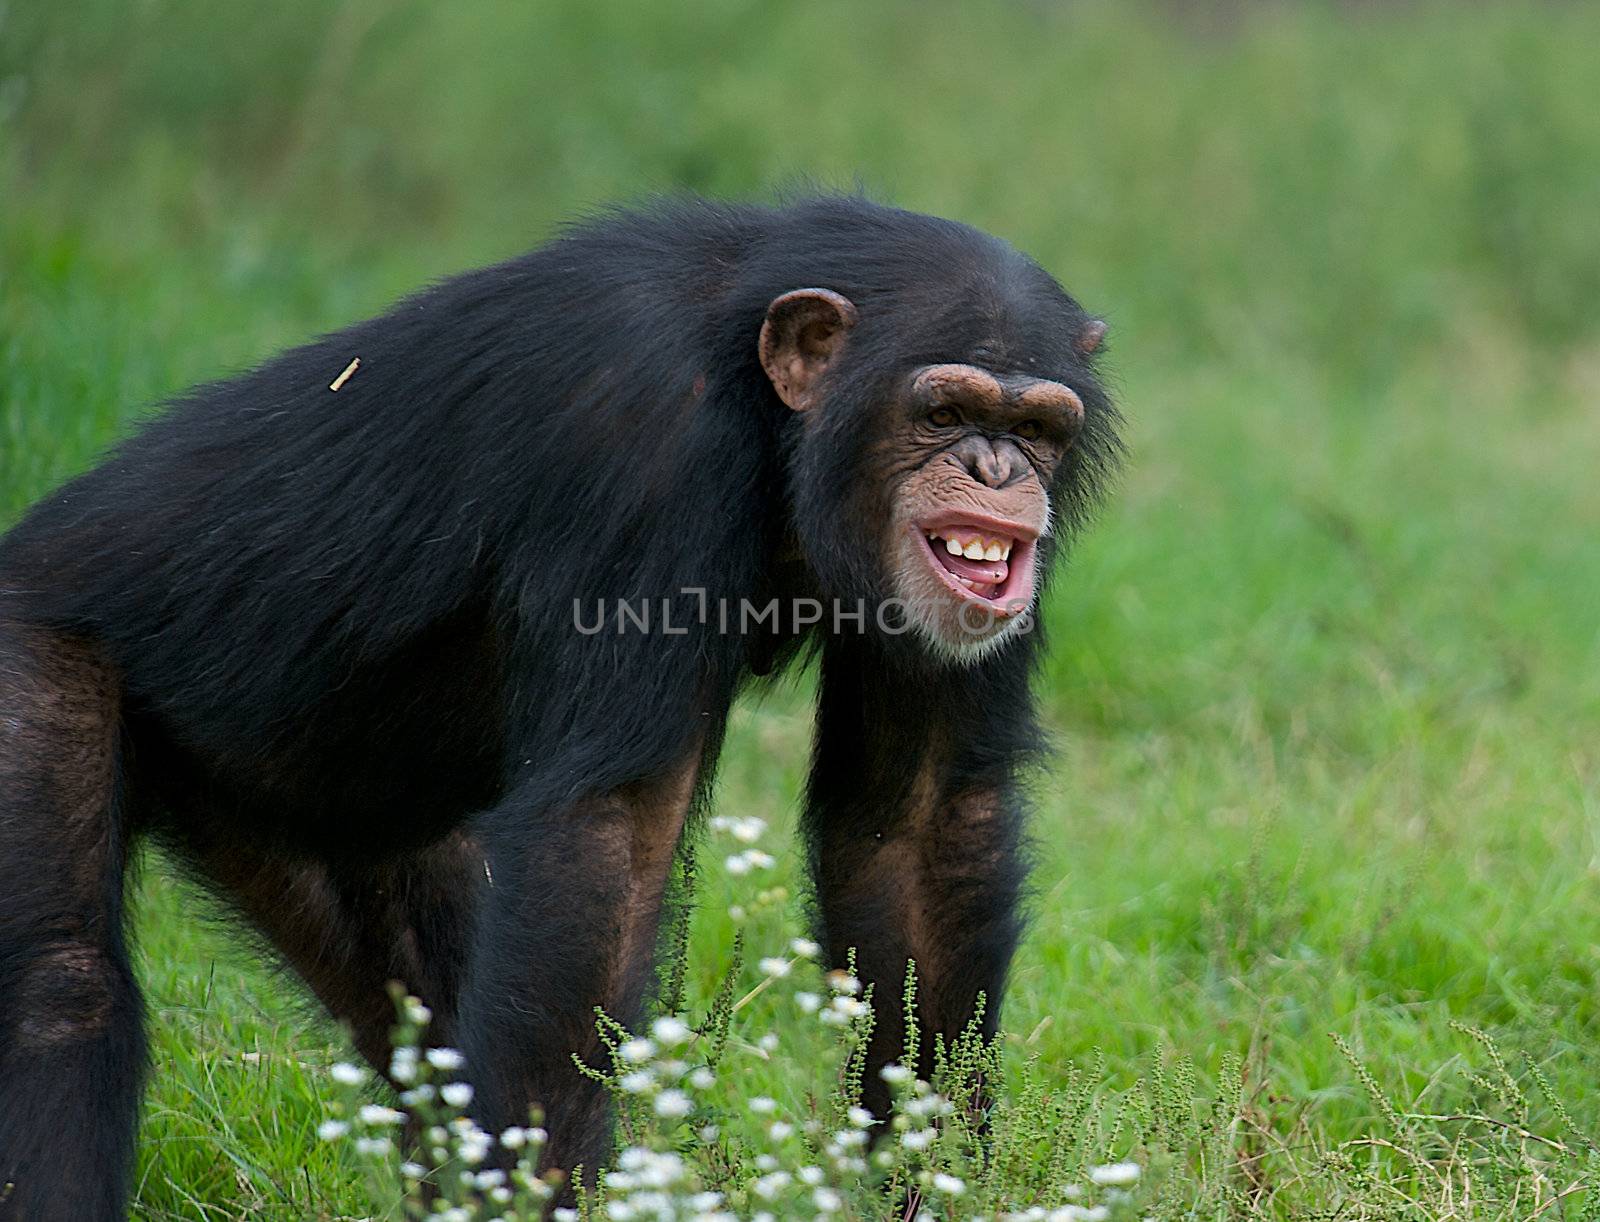 Funny chimpanzee in the grass with a very strange expression on his face